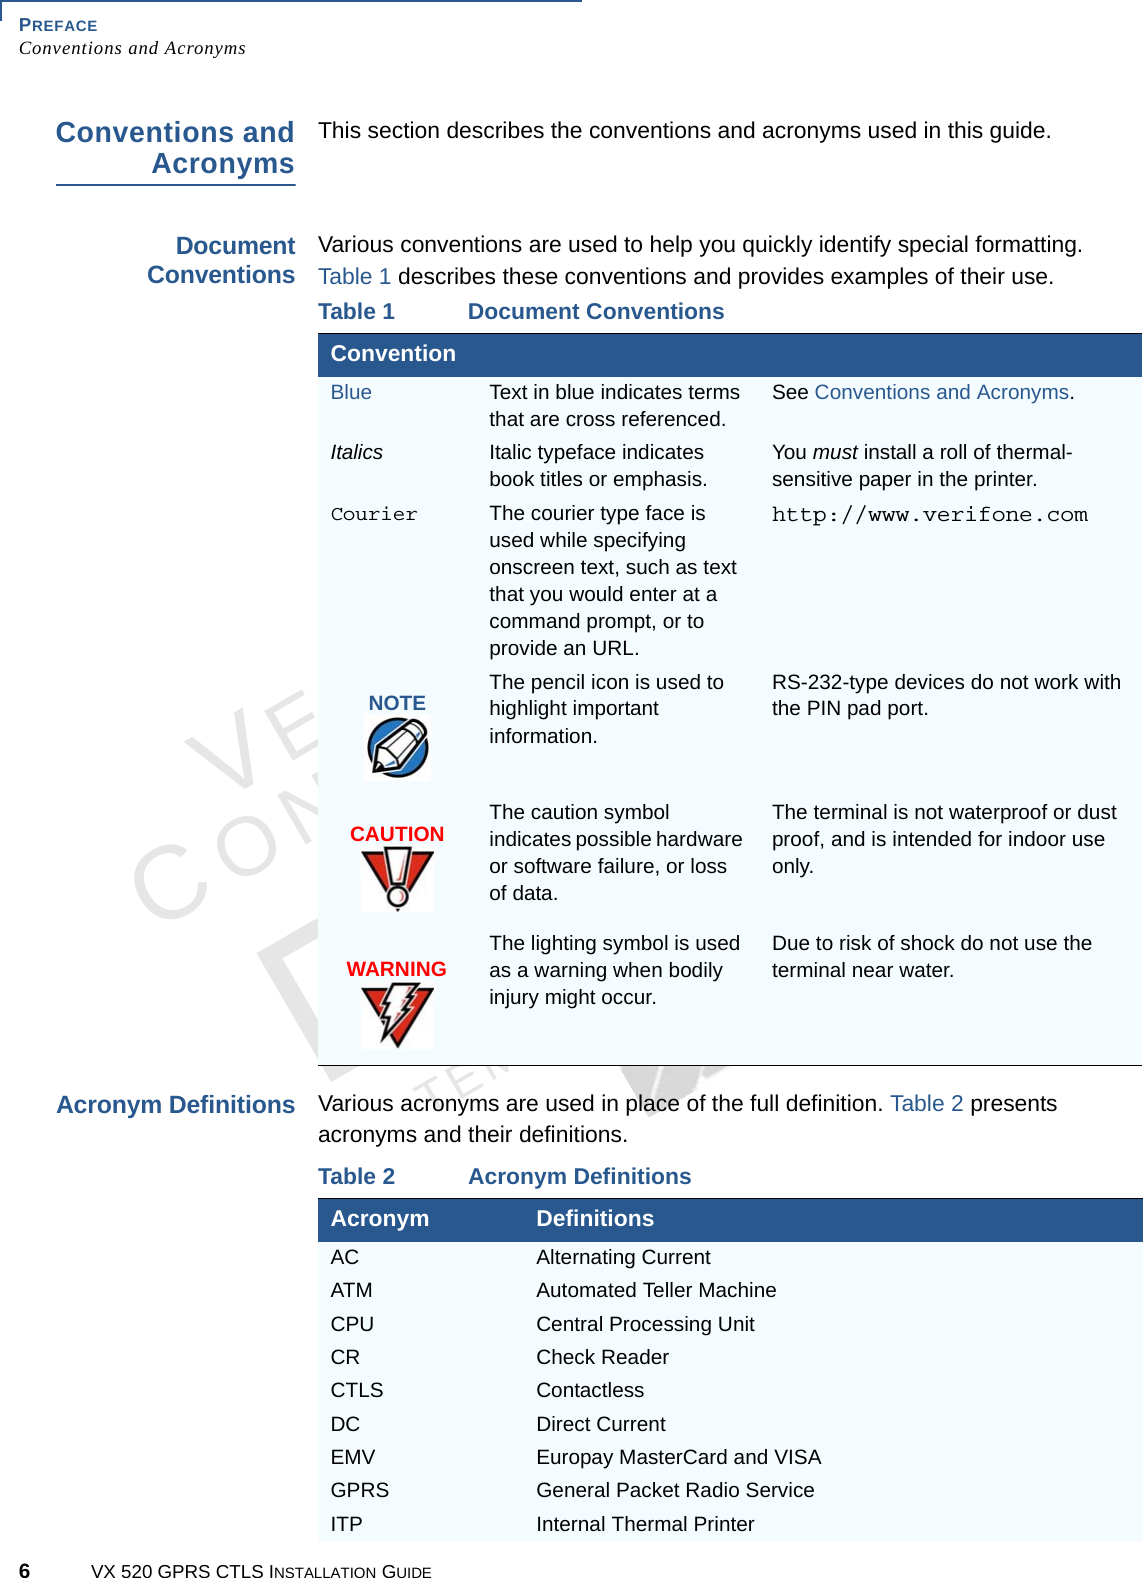 PREFACEConventions and Acronyms6VX 520 GPRS CTLS INSTALLATION GUIDEVERIFONECONFIDENTIALTEMPLATE REV F Conventions andAcronymsThis section describes the conventions and acronyms used in this guide.DocumentConventionsVarious conventions are used to help you quickly identify special formatting. Table 1 describes these conventions and provides examples of their use. Acronym DefinitionsVarious acronyms are used in place of the full definition. Table 2 presents acronyms and their definitions. Table 1 Document ConventionsConventionBlue Text in blue indicates terms that are cross referenced.See Conventions and Acronyms.Italics Italic typeface indicates book titles or emphasis. You must install a roll of thermal-sensitive paper in the printer.Courier The courier type face is used while specifying onscreen text, such as text that you would enter at a command prompt, or to provide an URL.http://www.verifone.comThe pencil icon is used to highlight important information.RS-232-type devices do not work with the PIN pad port.The caution symbol indicates possible hardware or software failure, or loss of data.The terminal is not waterproof or dust proof, and is intended for indoor use only.The lighting symbol is used as a warning when bodily injury might occur.Due to risk of shock do not use the terminal near water.NOTECAUTIONWARNINGTable 2 Acronym DefinitionsAcronym DefinitionsAC Alternating CurrentATM Automated Teller MachineCPU Central Processing UnitCR Check ReaderCTLS ContactlessDC Direct CurrentEMV Europay MasterCard and VISAGPRS General Packet Radio ServiceITP Internal Thermal Printer